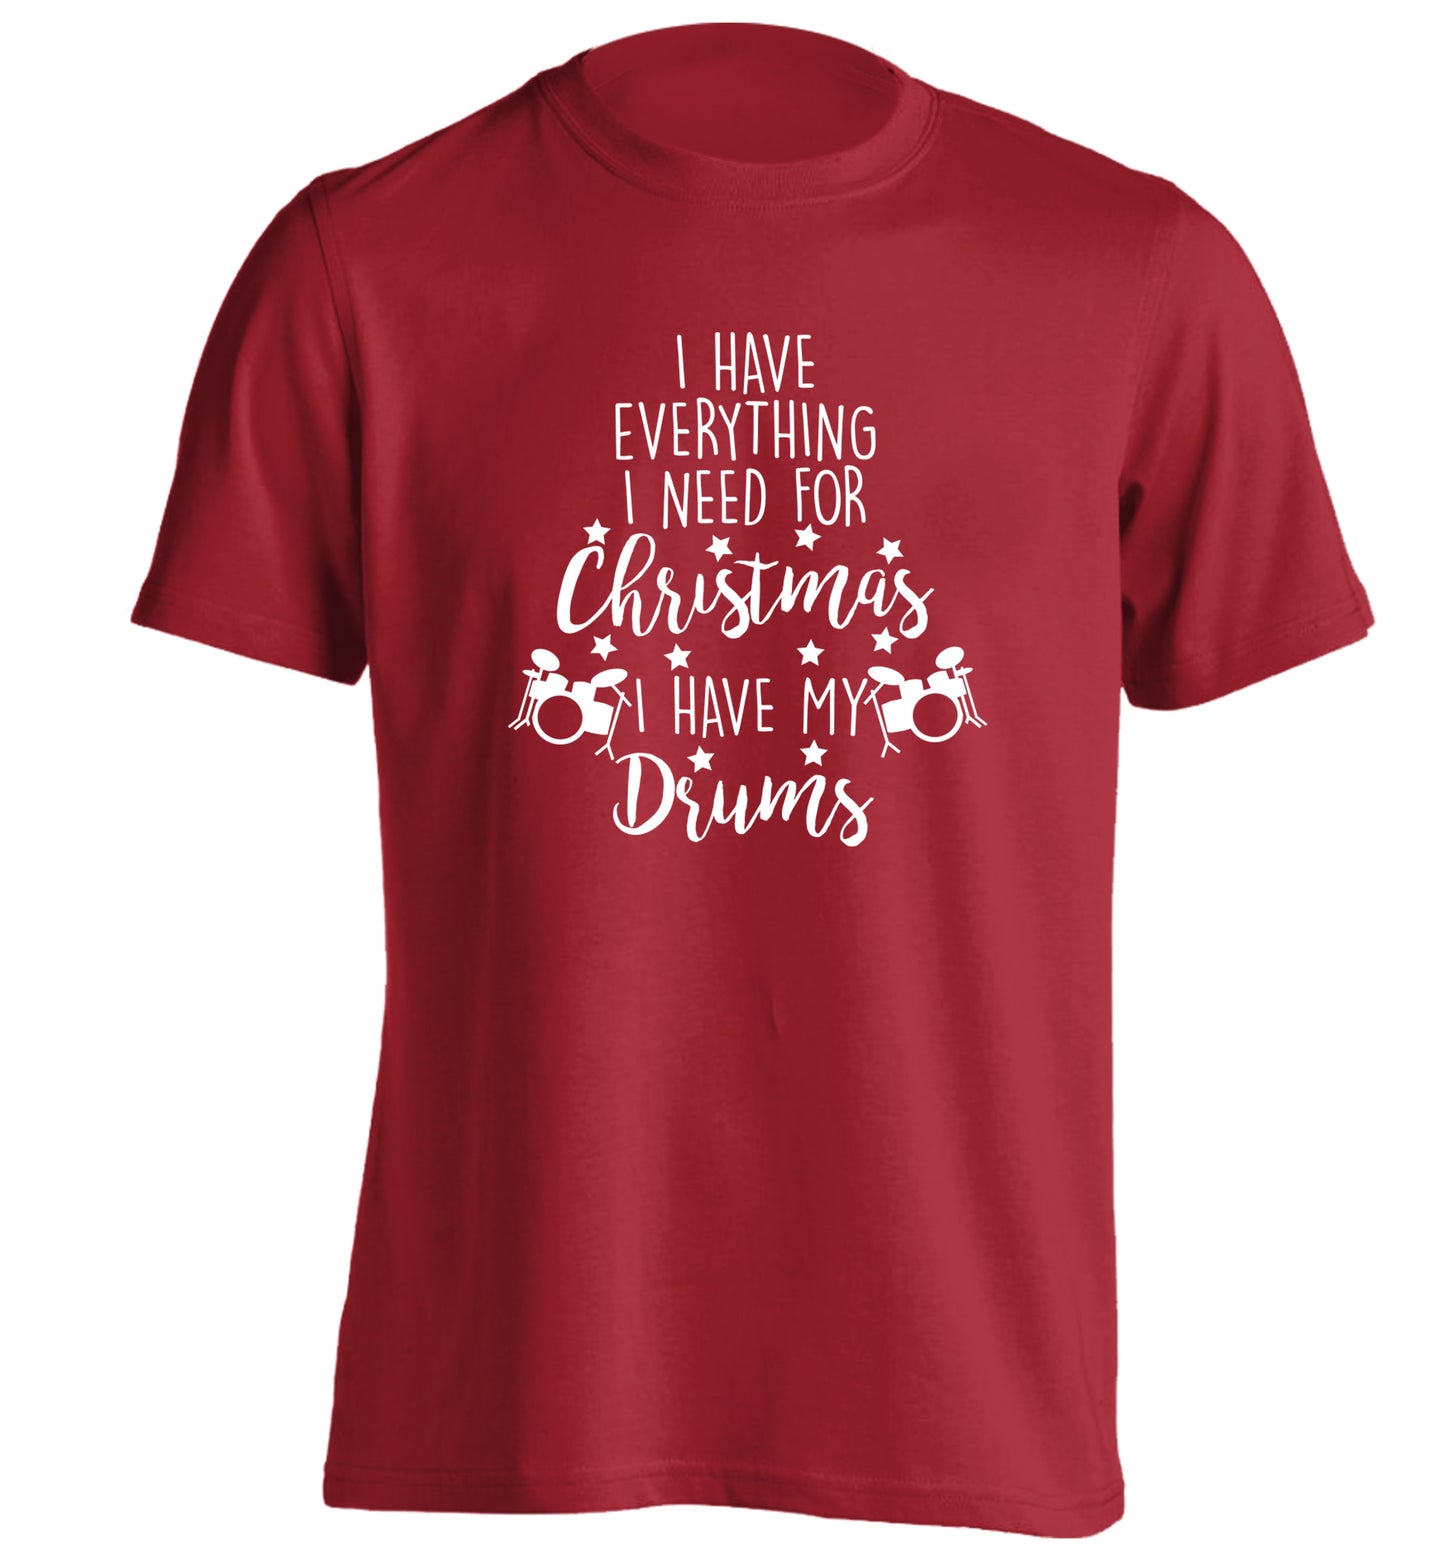 I have everything I need for Christmas I have my drums! adults unisex red Tshirt 2XL